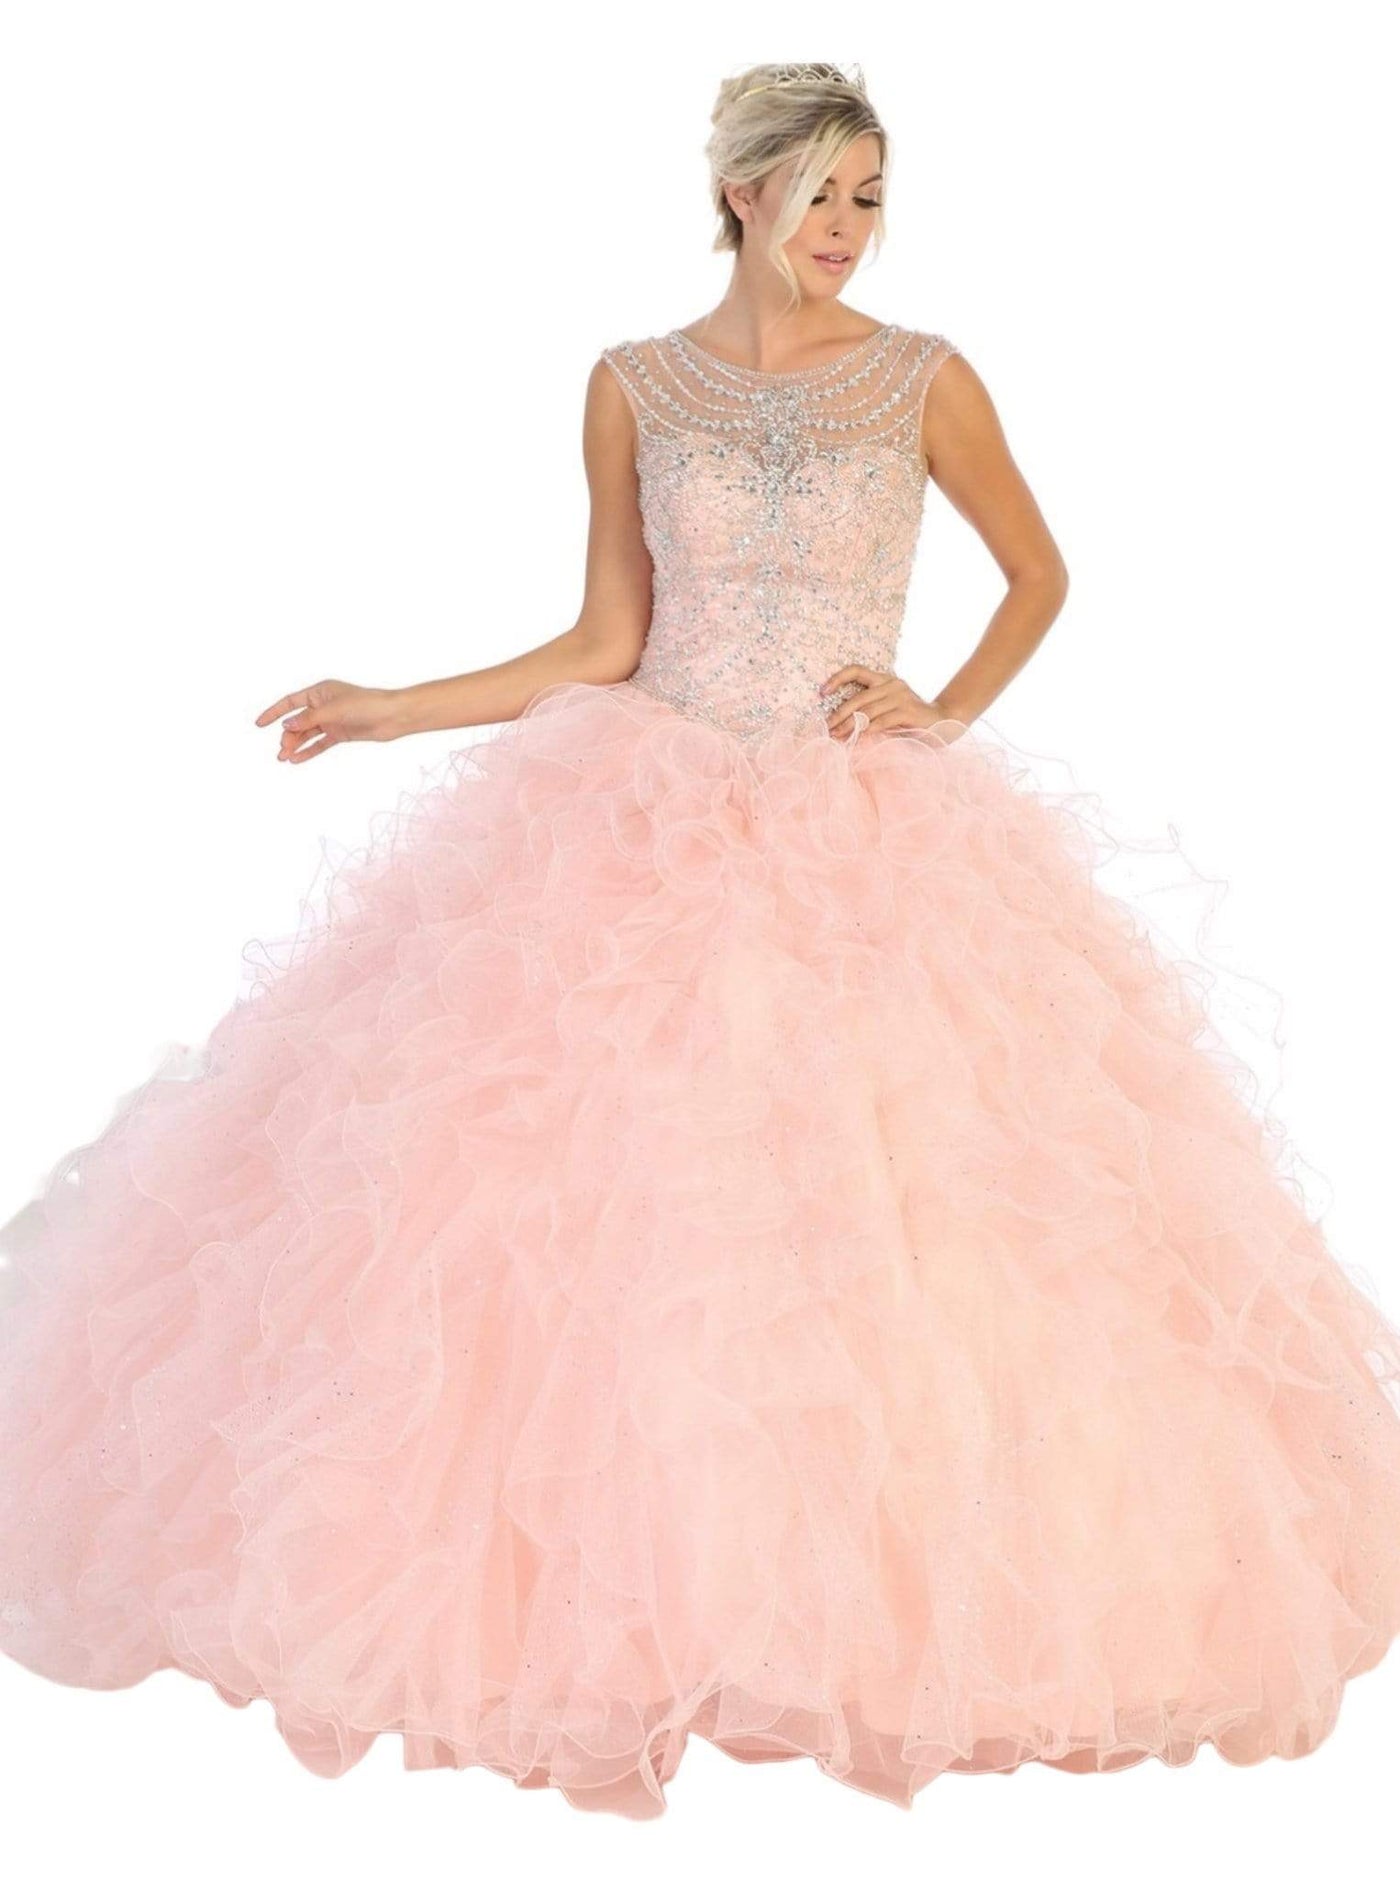 May Queen - LK124 Cap Sleeve Crystal Ornate Ruffled Ballgown Quinceanera Dresses 4 / Blush